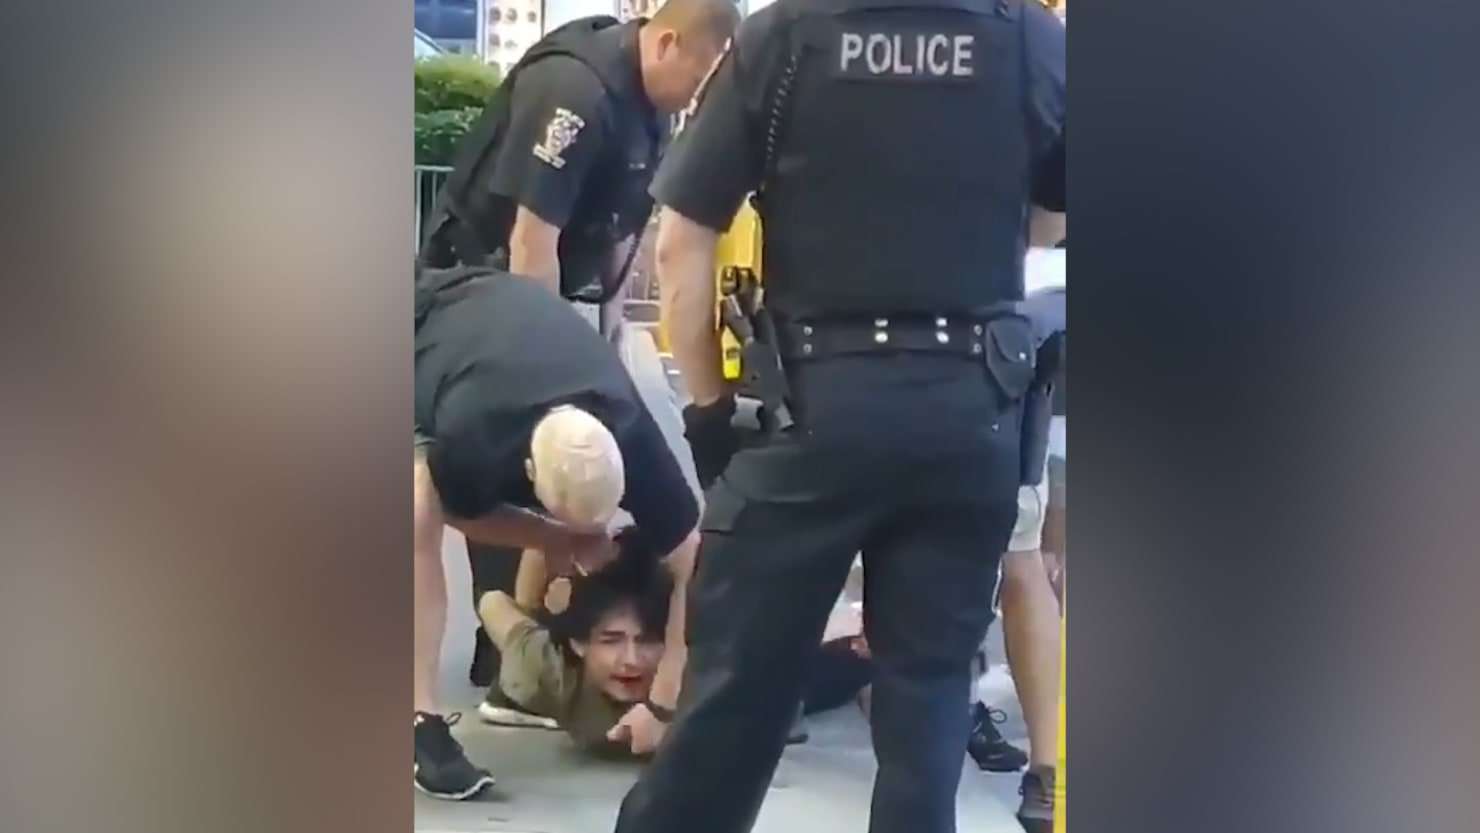 image for Cop Charged With Assault After Video Shows Him Slamming Suspect’s Head Into Pavement